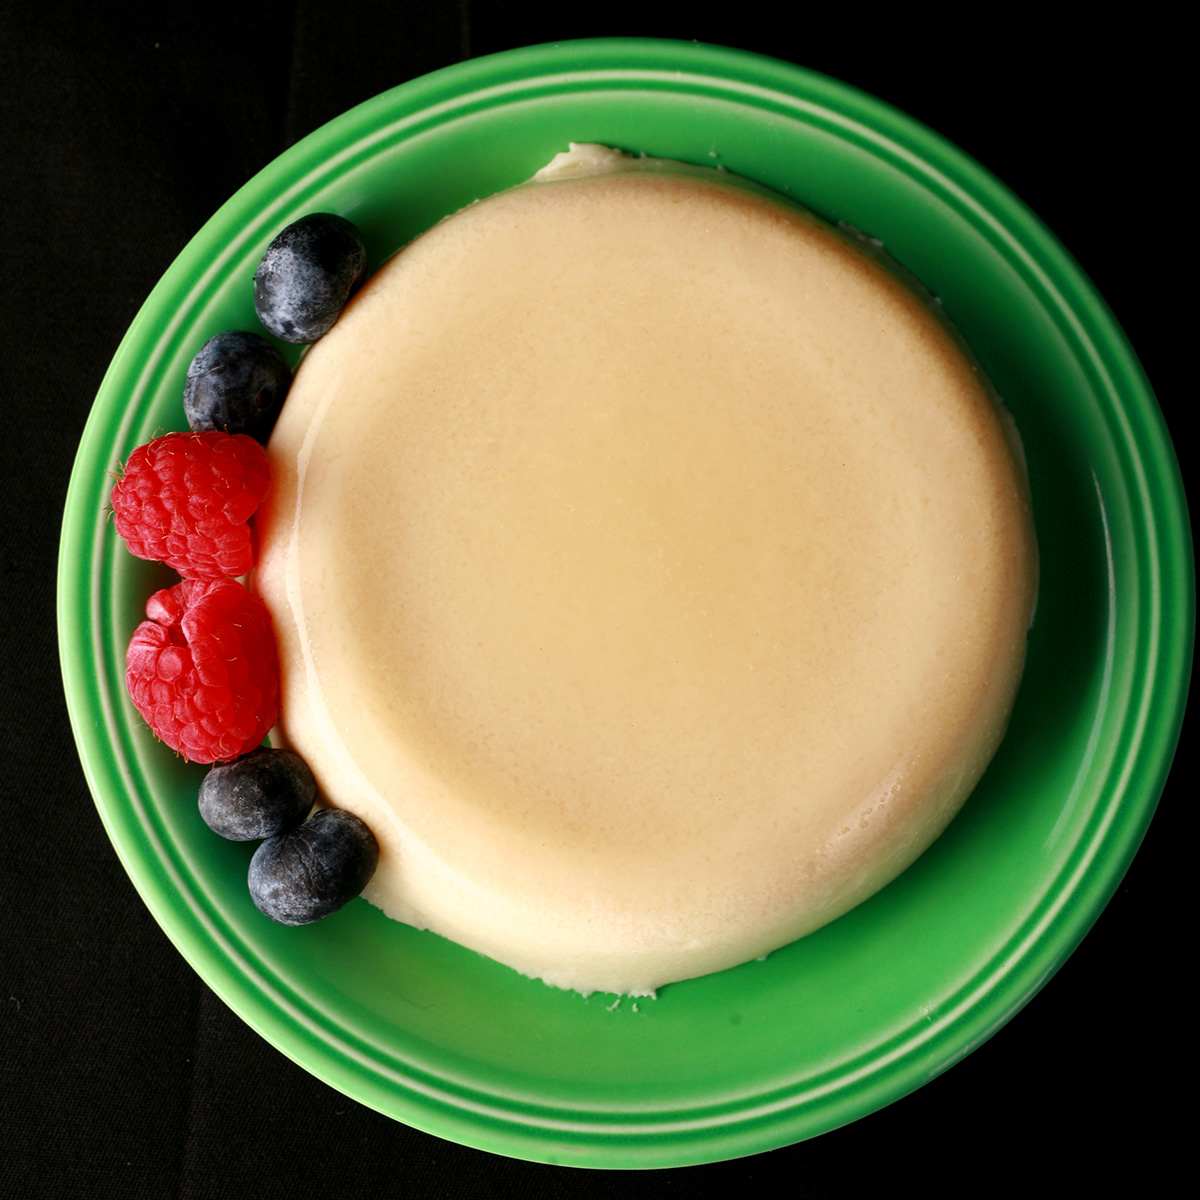 A round serving of calamansi dairy-free panna cotta on a green plate, with raspberries and blueberries next to it.